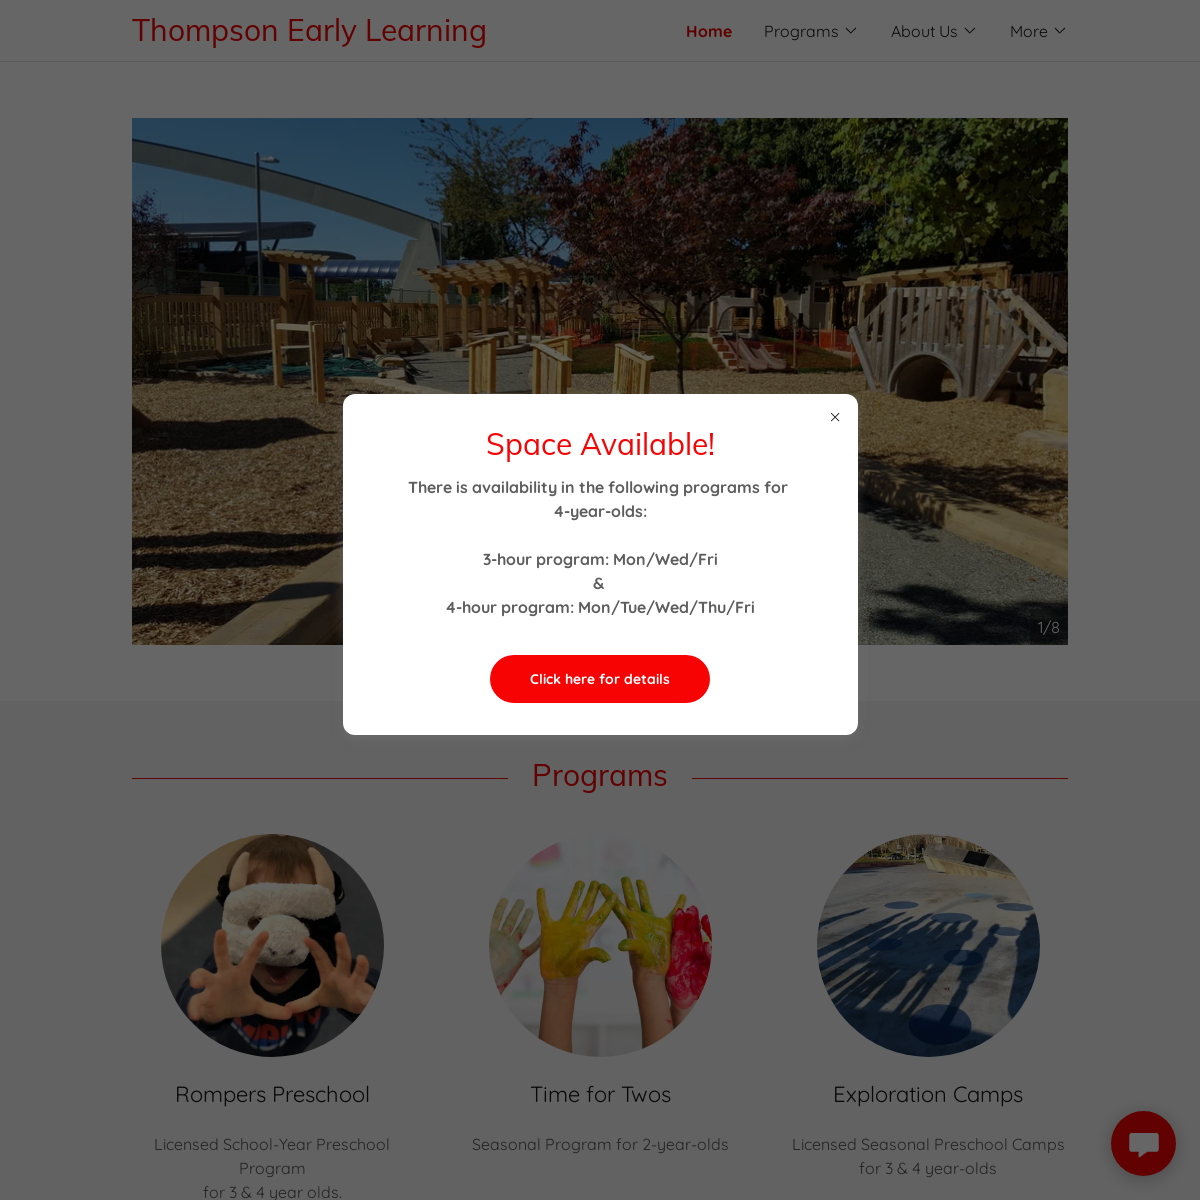 A complete backup of thompsonearlylearning.com